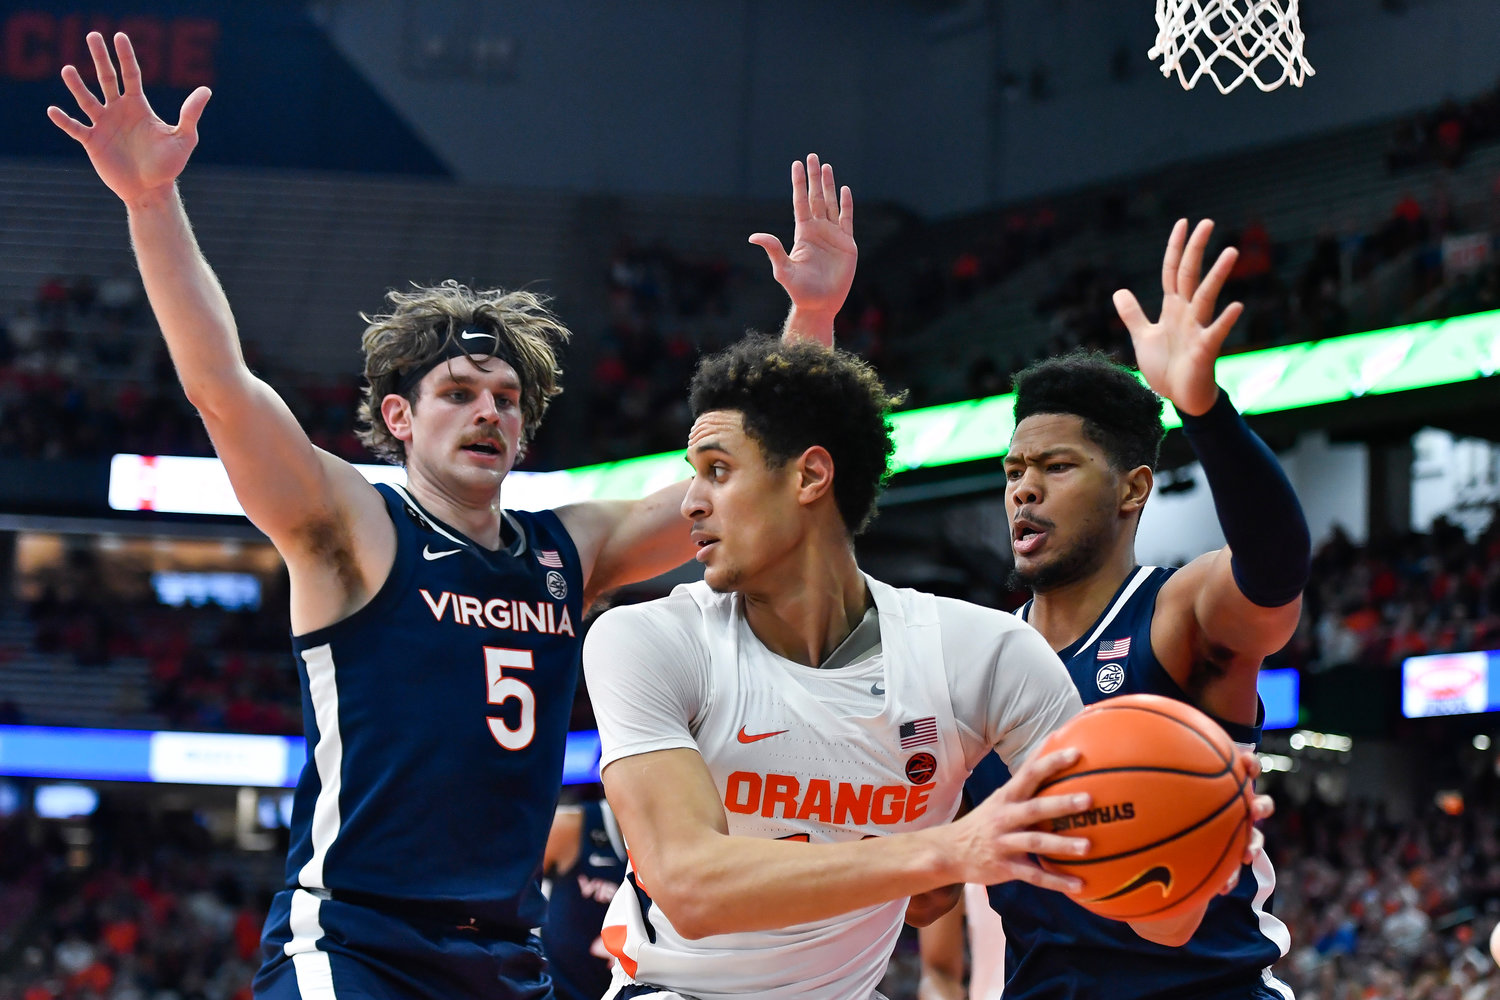 Syracuse center Jesse Edwards, center, is defended by Virginia forwards Ben Vander Plas, left, and Jayden Gardner during the first half of Monday night's game in Syracuse. The Orange lost 67-62.